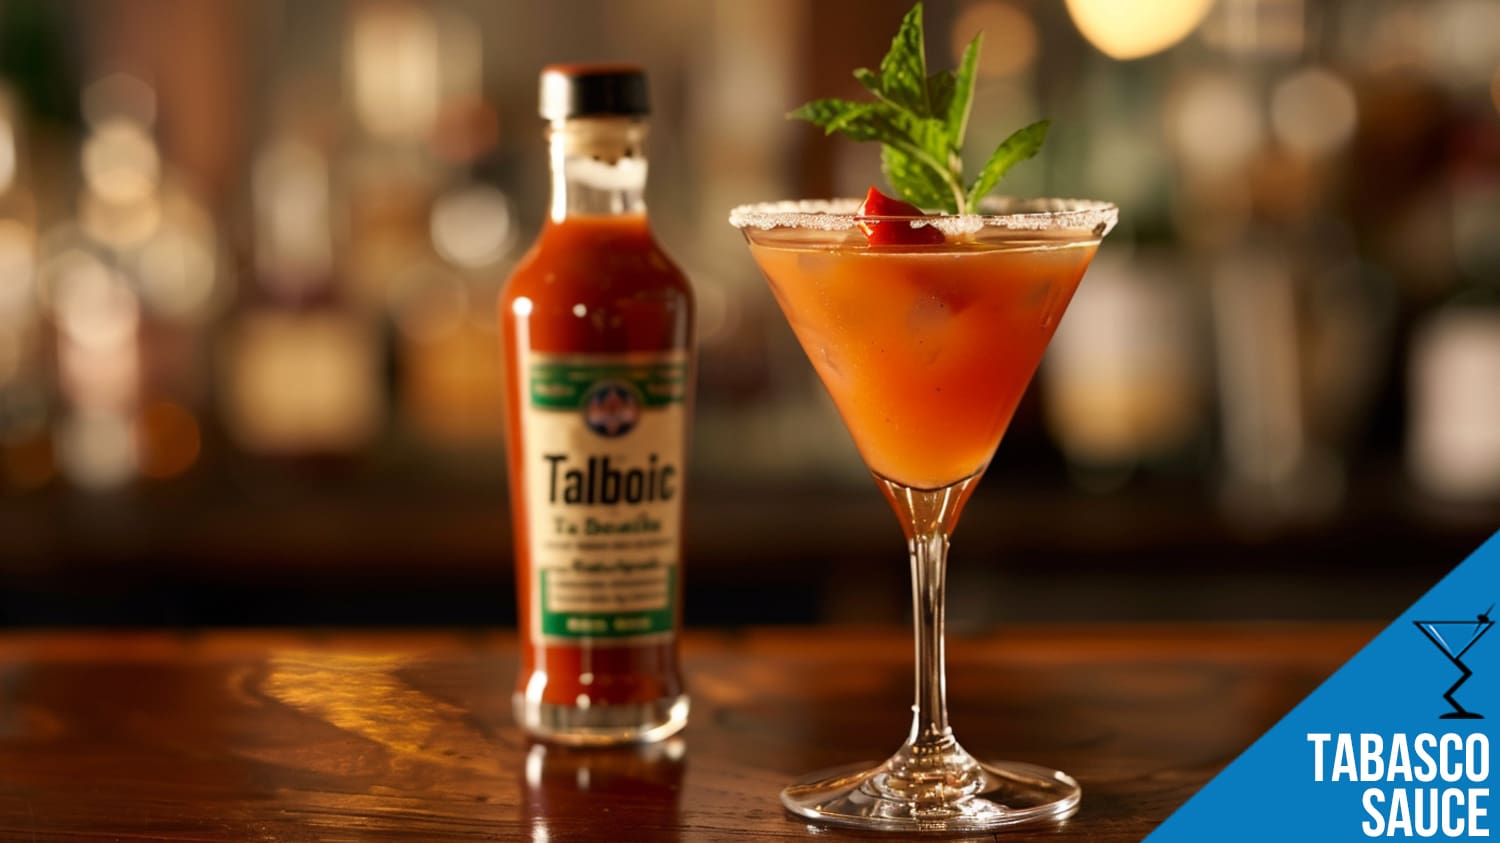 Best Tabasco Sauce Cocktails: Spicy Recipes, Flavors, and Top Brands